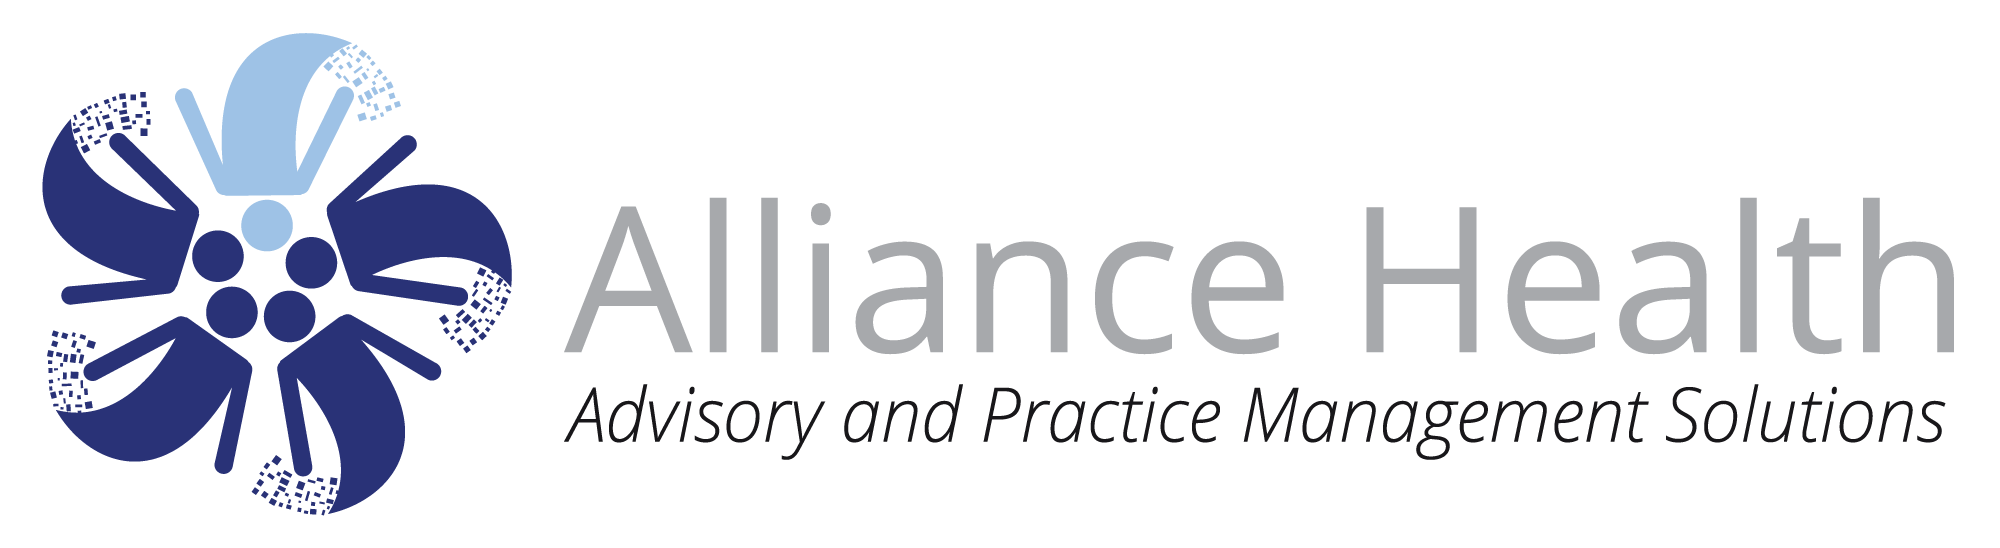 Alliance Health System - Advisory And Practice Management Solutions